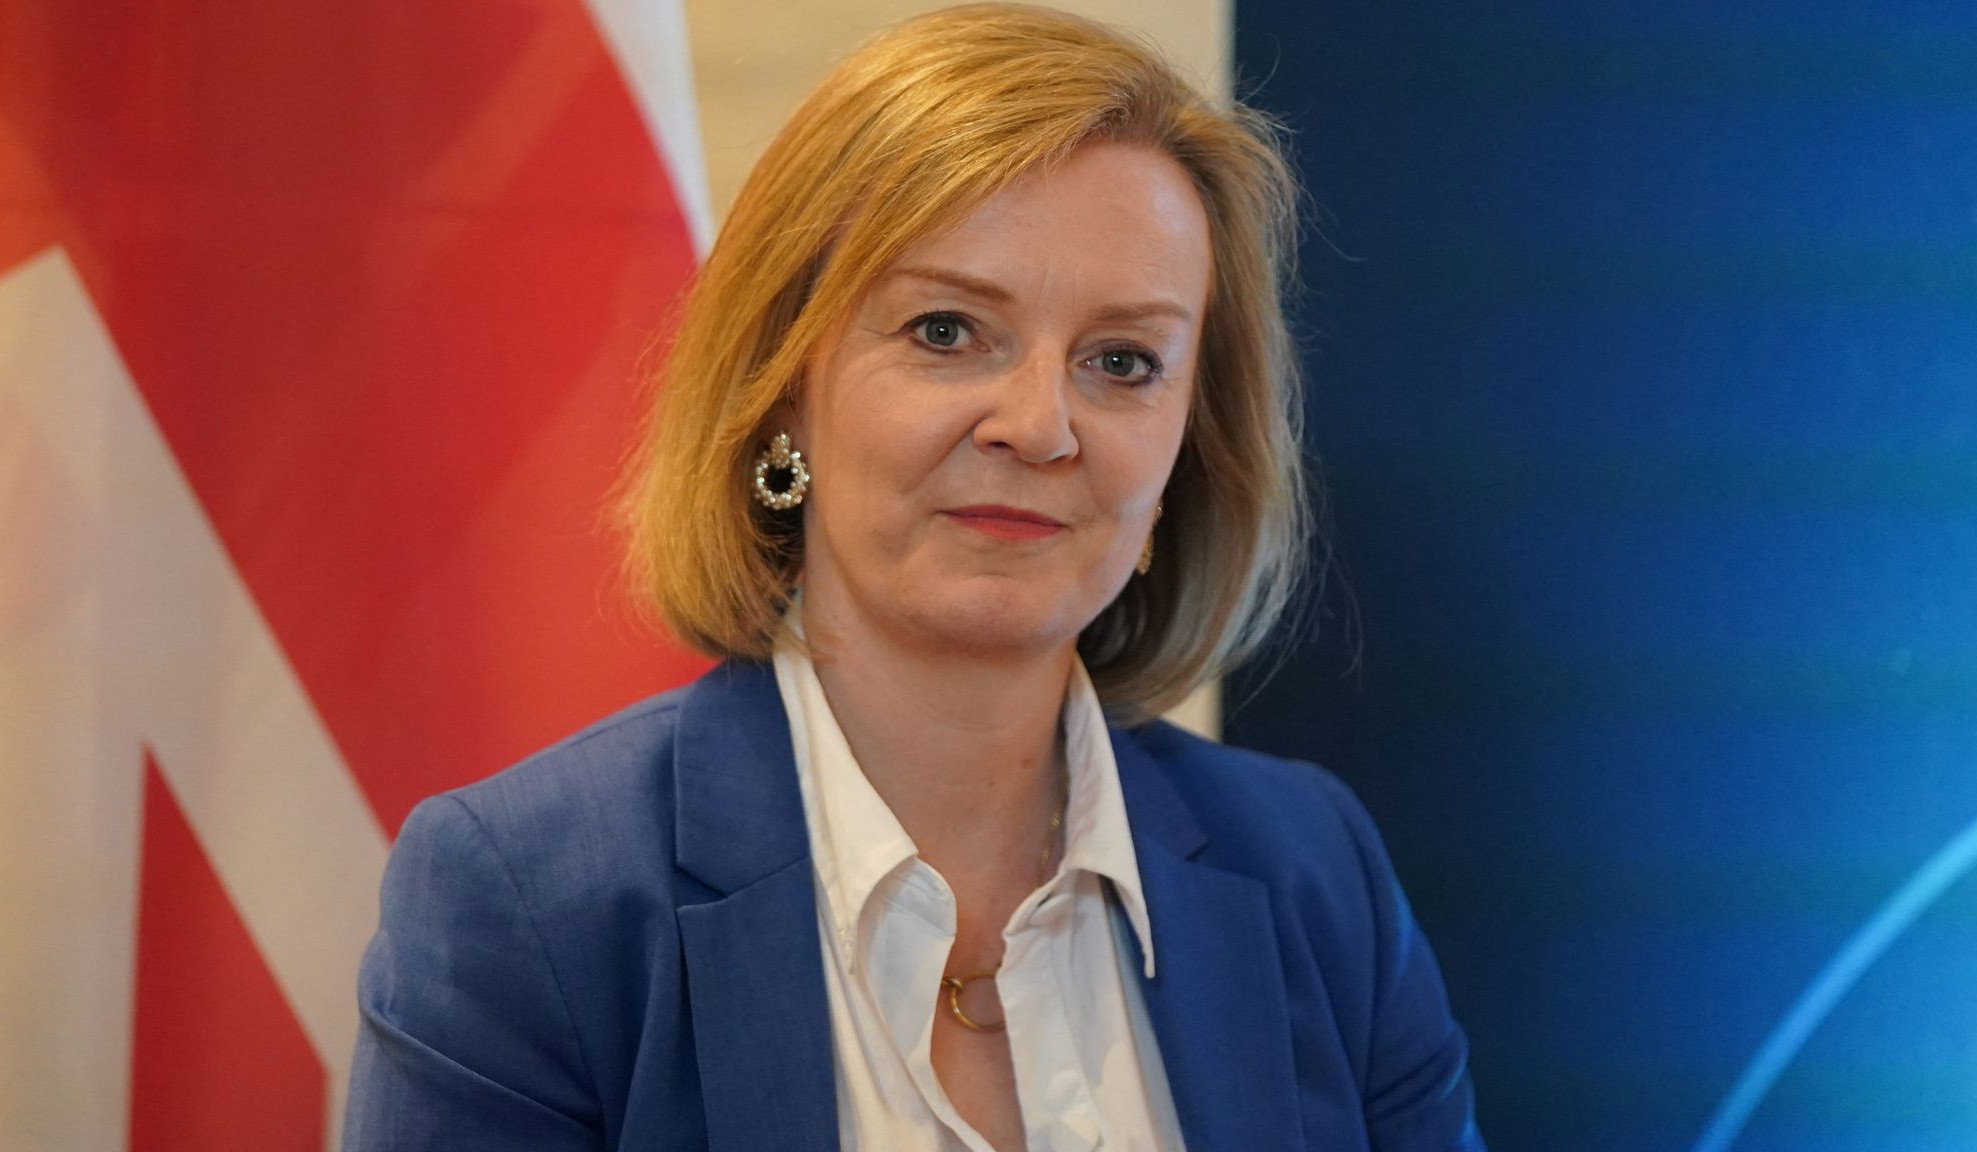 Russia's actions in Ukraine have huge ramifications for global peace, prosperity and food security: Liz Truss